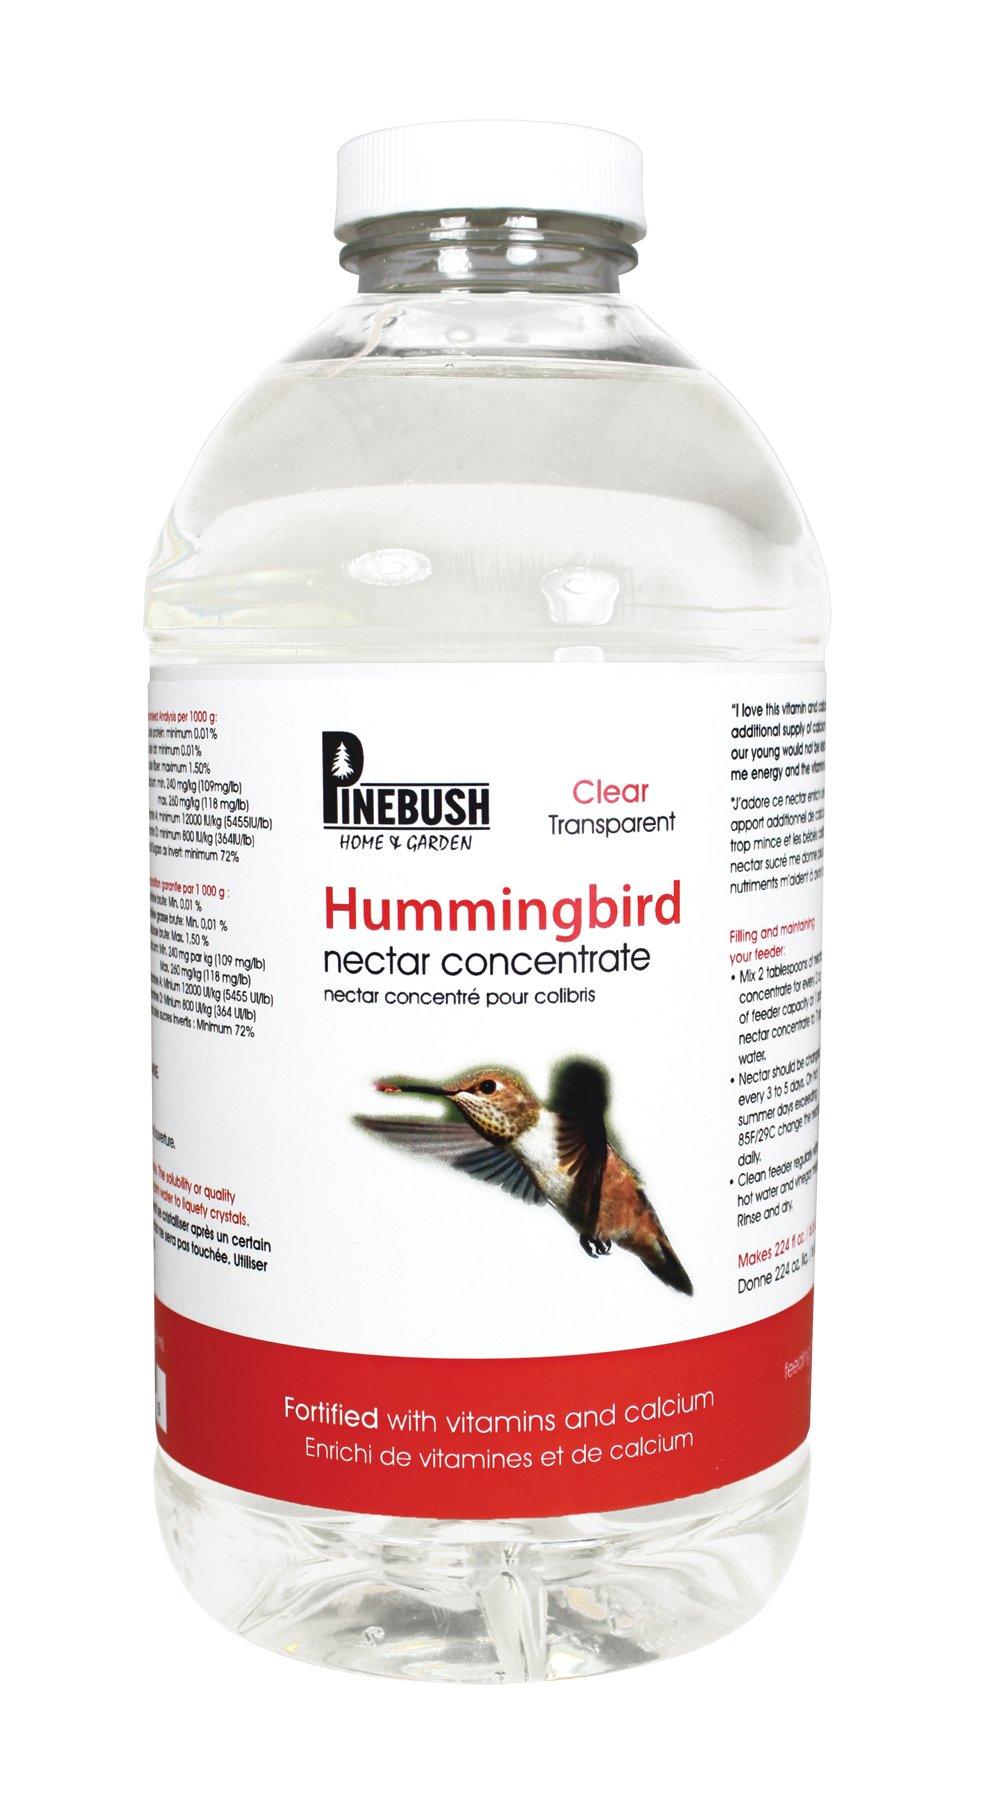 Hummingbird Nectar Concentrated